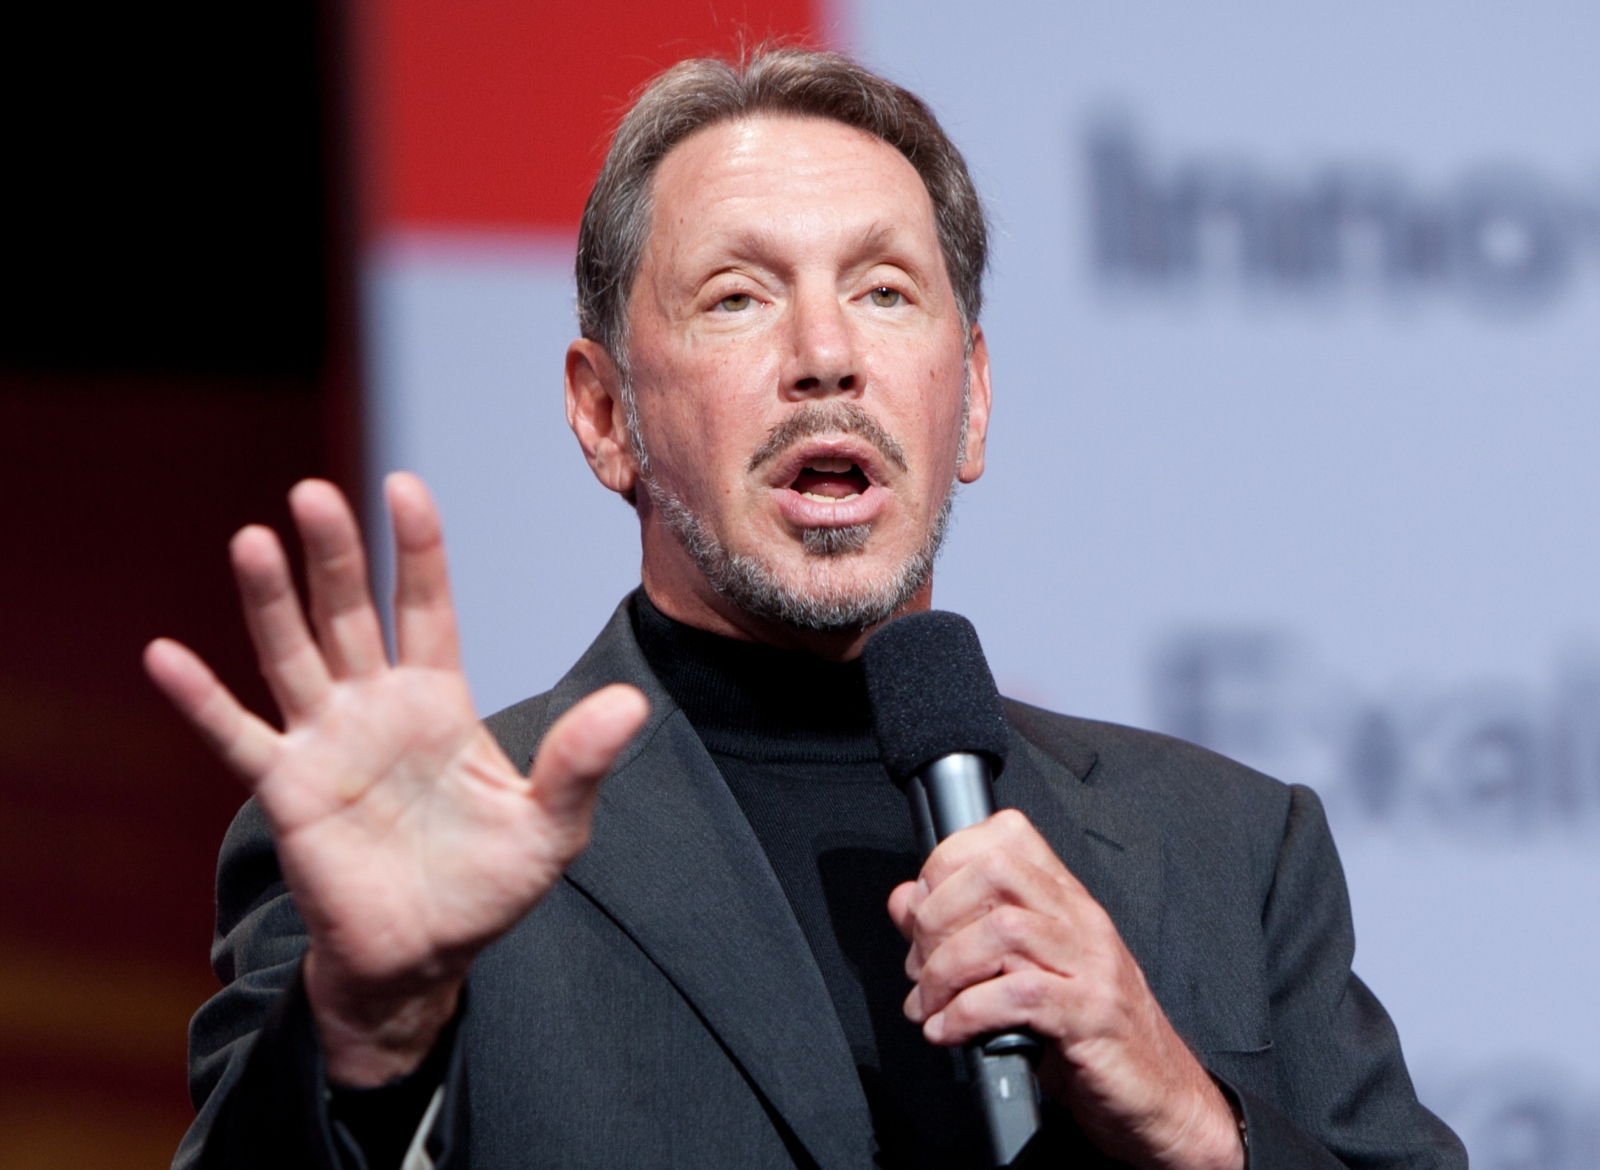 Larry Ellison: A Brief History of the Oracle Corp. Founder